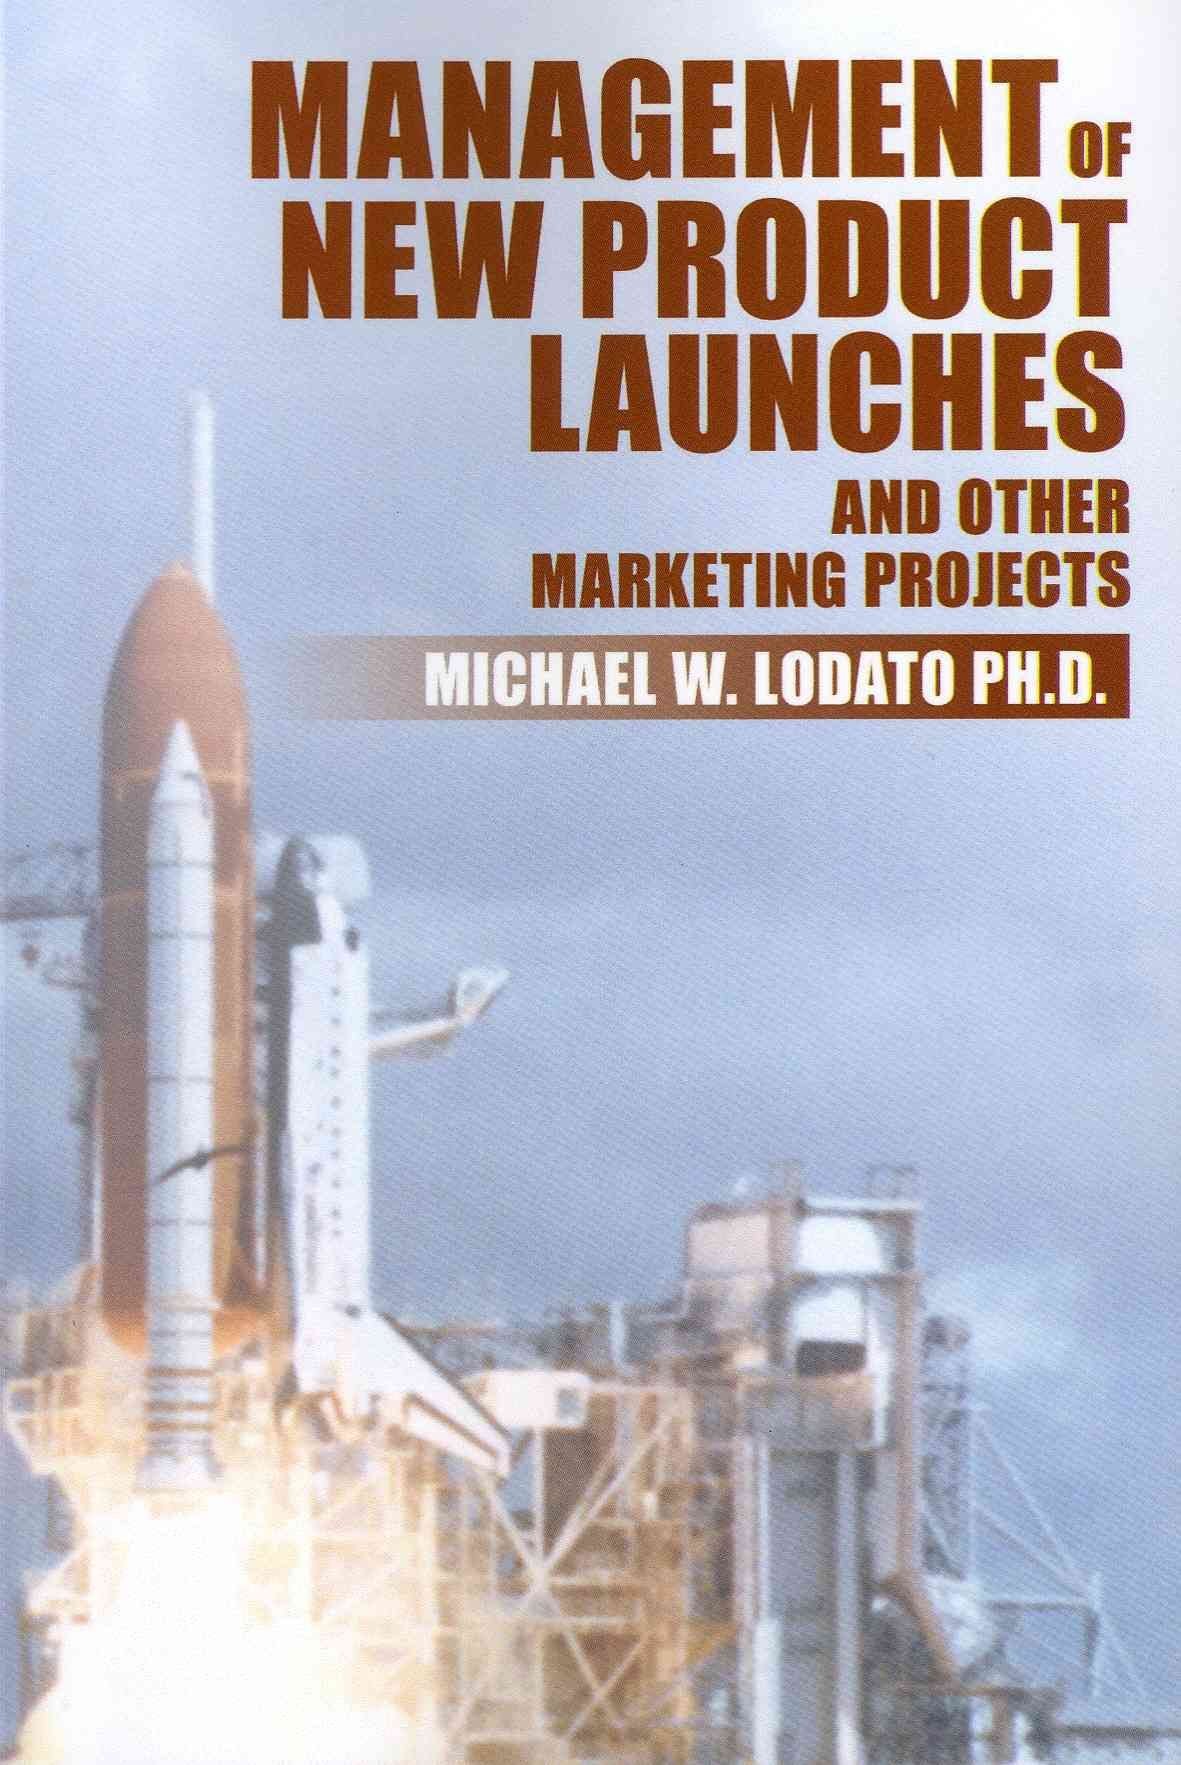 Management of New Product Launches and Other Marketing Projects